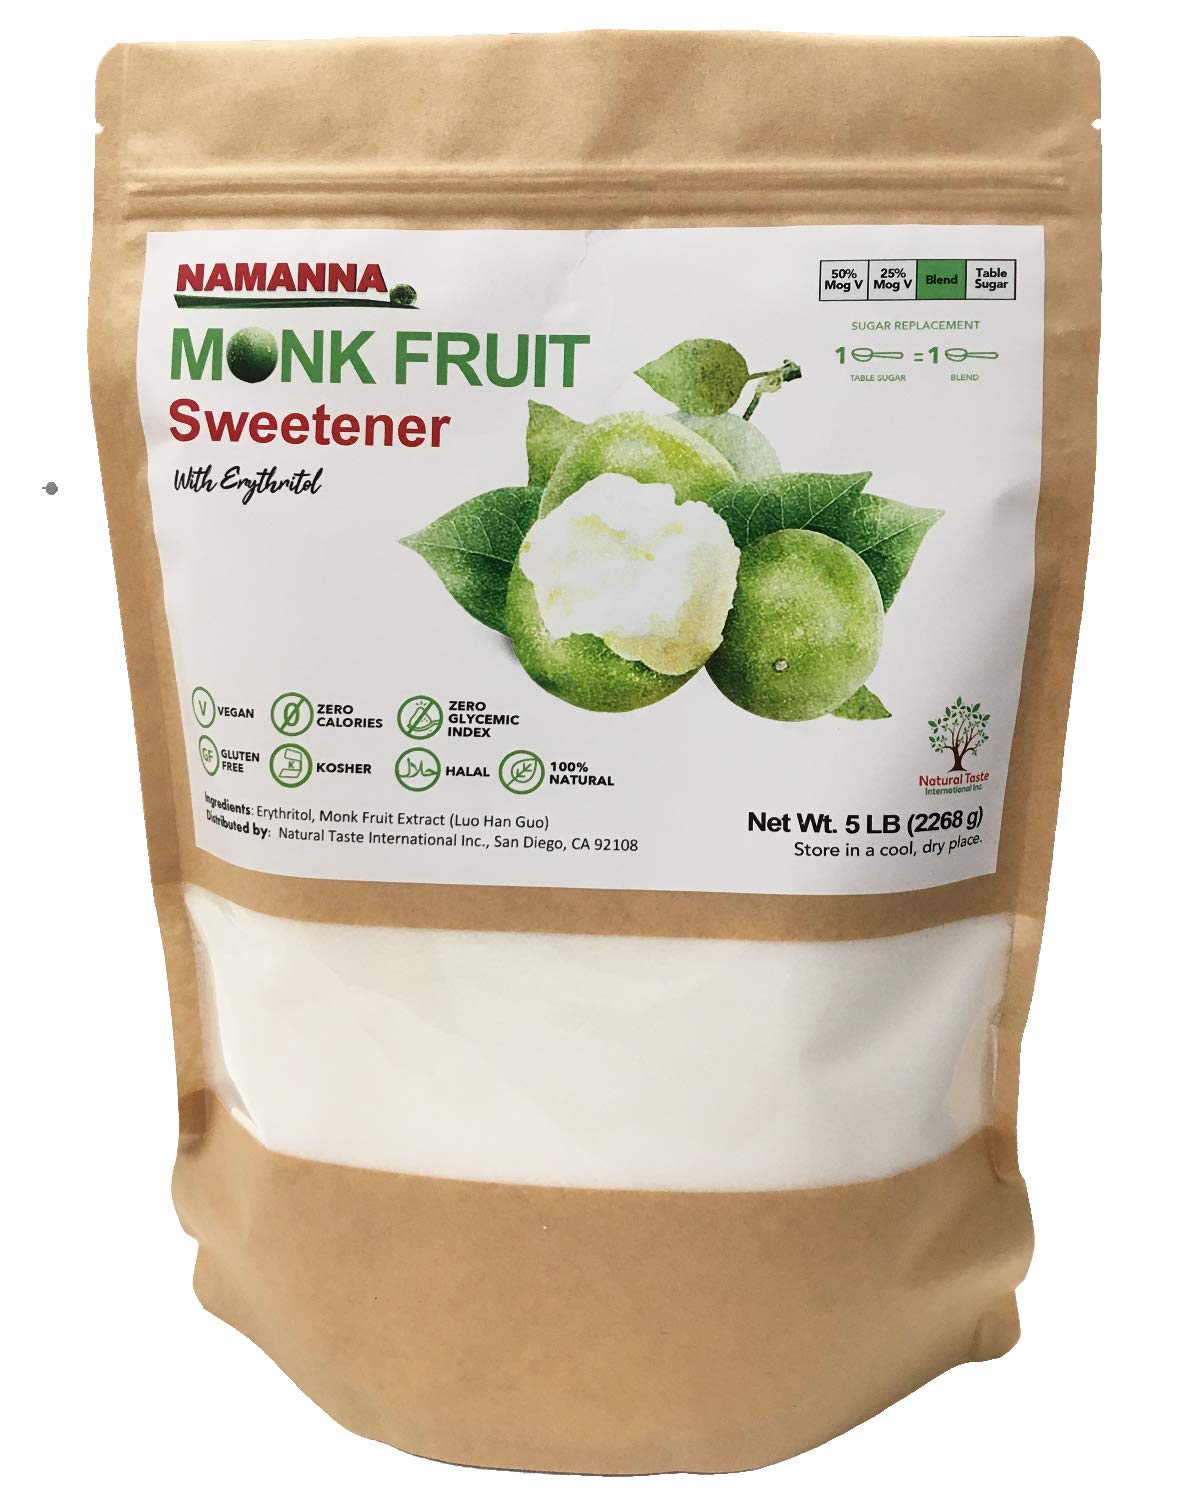 NAMANNA Monk Fruit Sweetener - 1:1 Sugar Substitute, Classic White with  Erythritol, Granulated, 10 lb